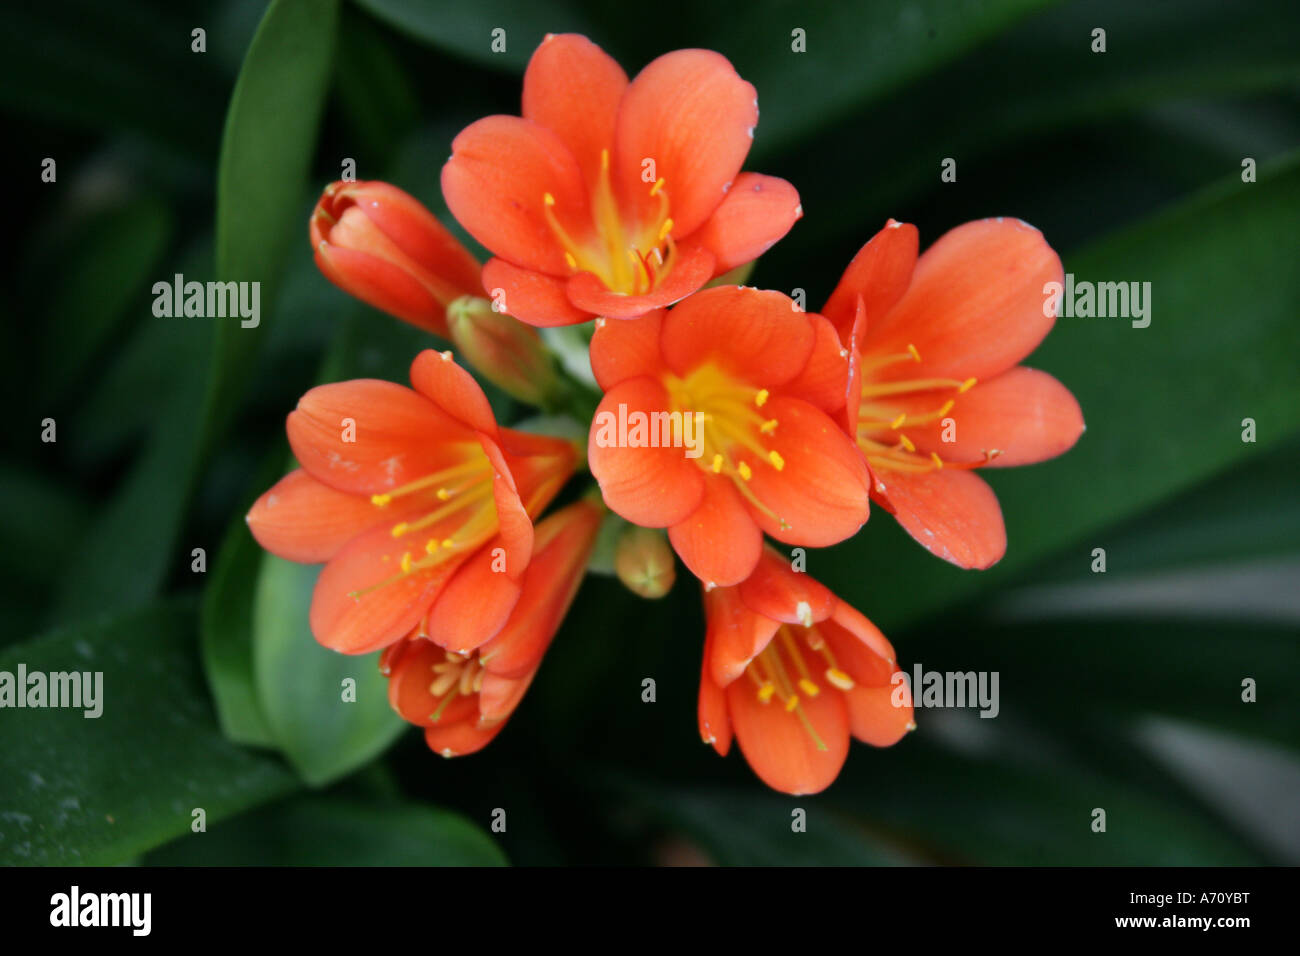 Clivia miniata or Kaffir Lily, Bush Lily, St Johns Lily or Fire Lily, Amaryllidaceae Stock Photo